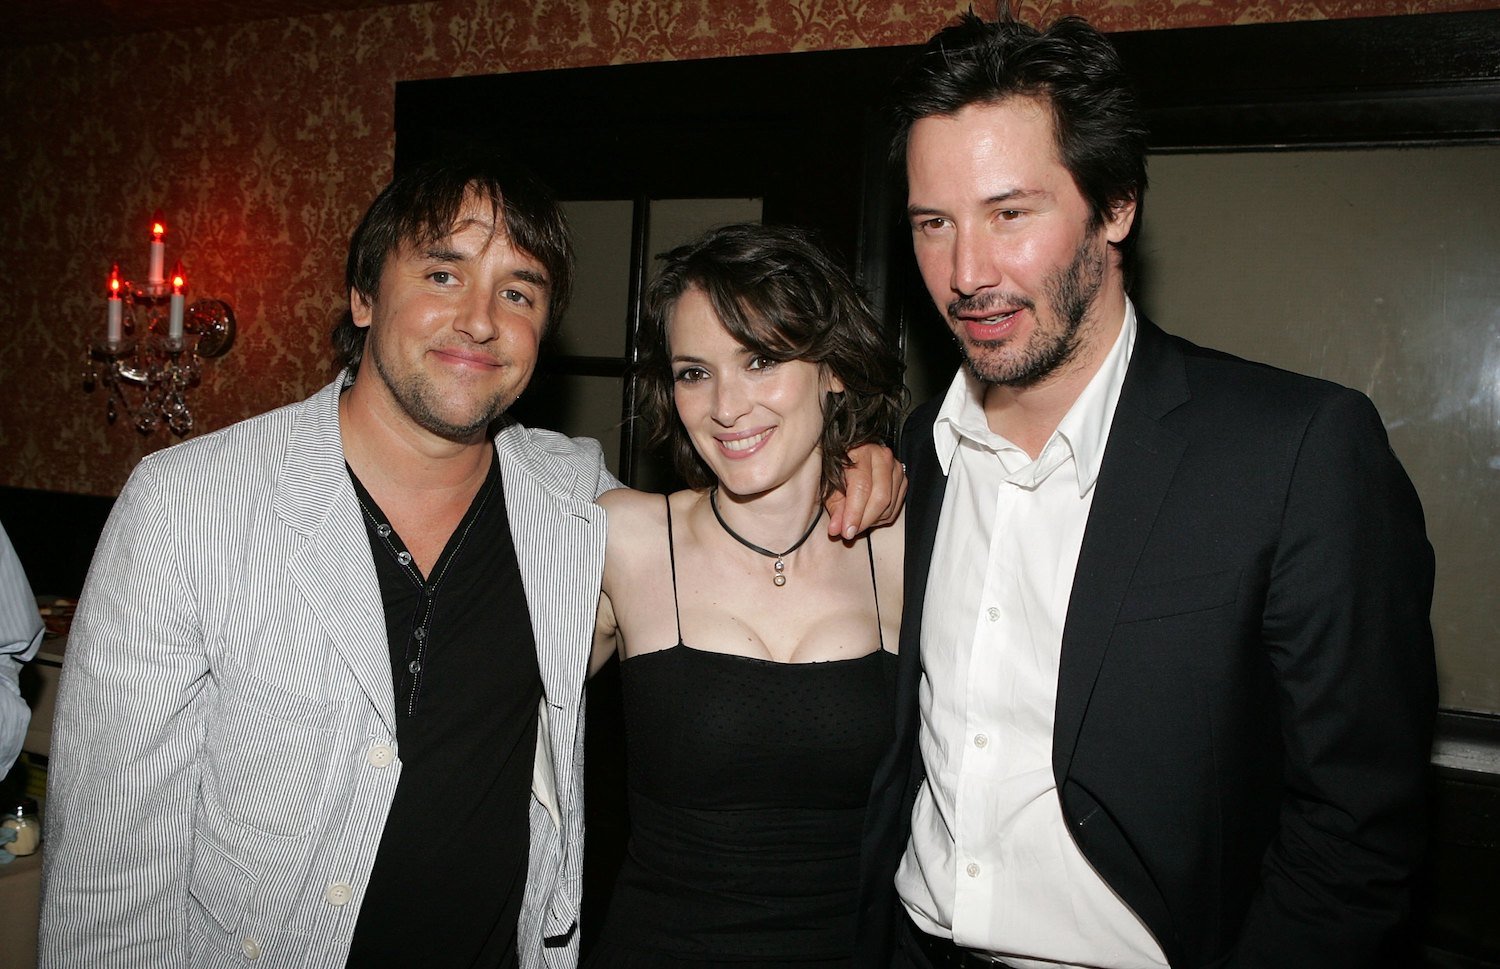 Richard Linklater, Winona Ryder, and Keanu Reeves at the Los Angeles premiere after party of A Scanner Darkly